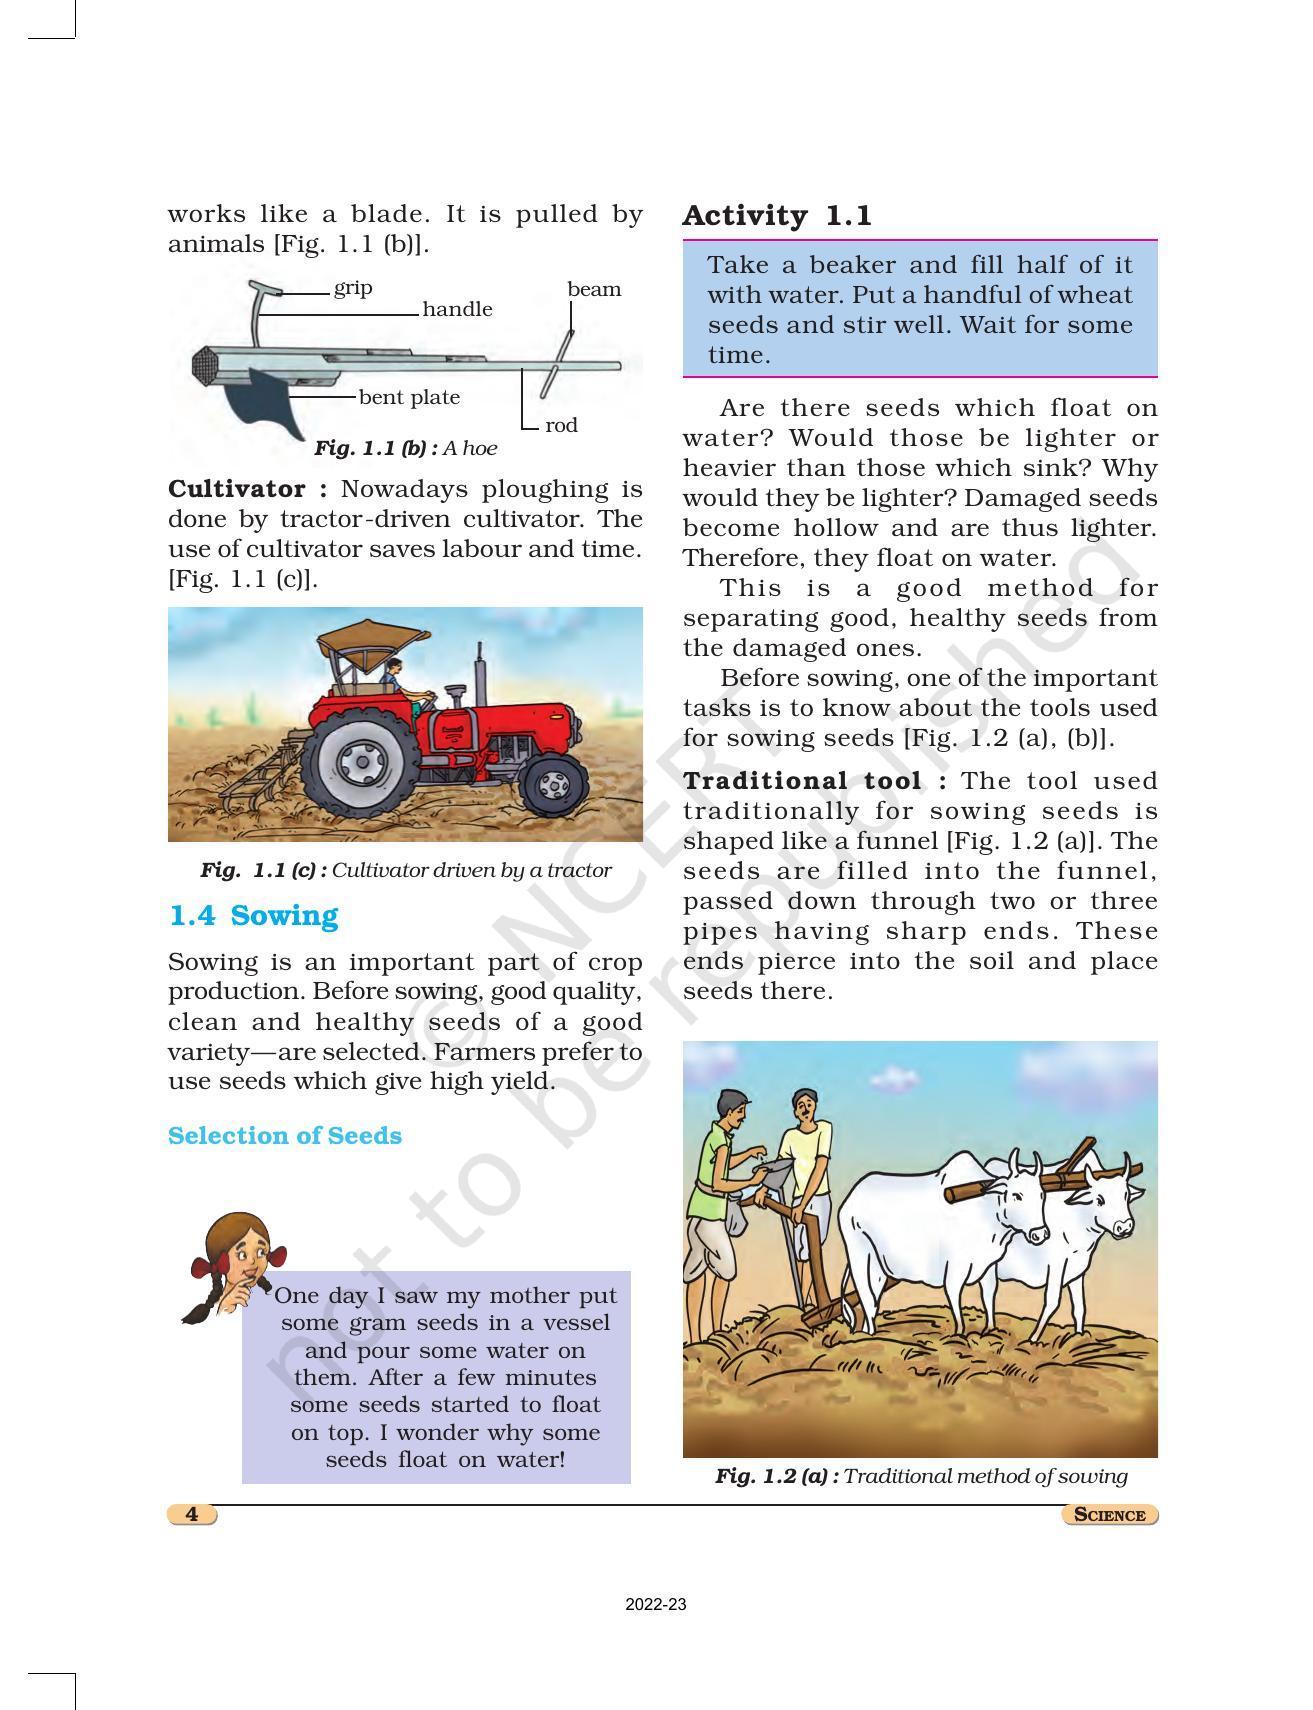 NCERT Book for Class 8 Science Chapter 1 Crop Production and Management - Page 4